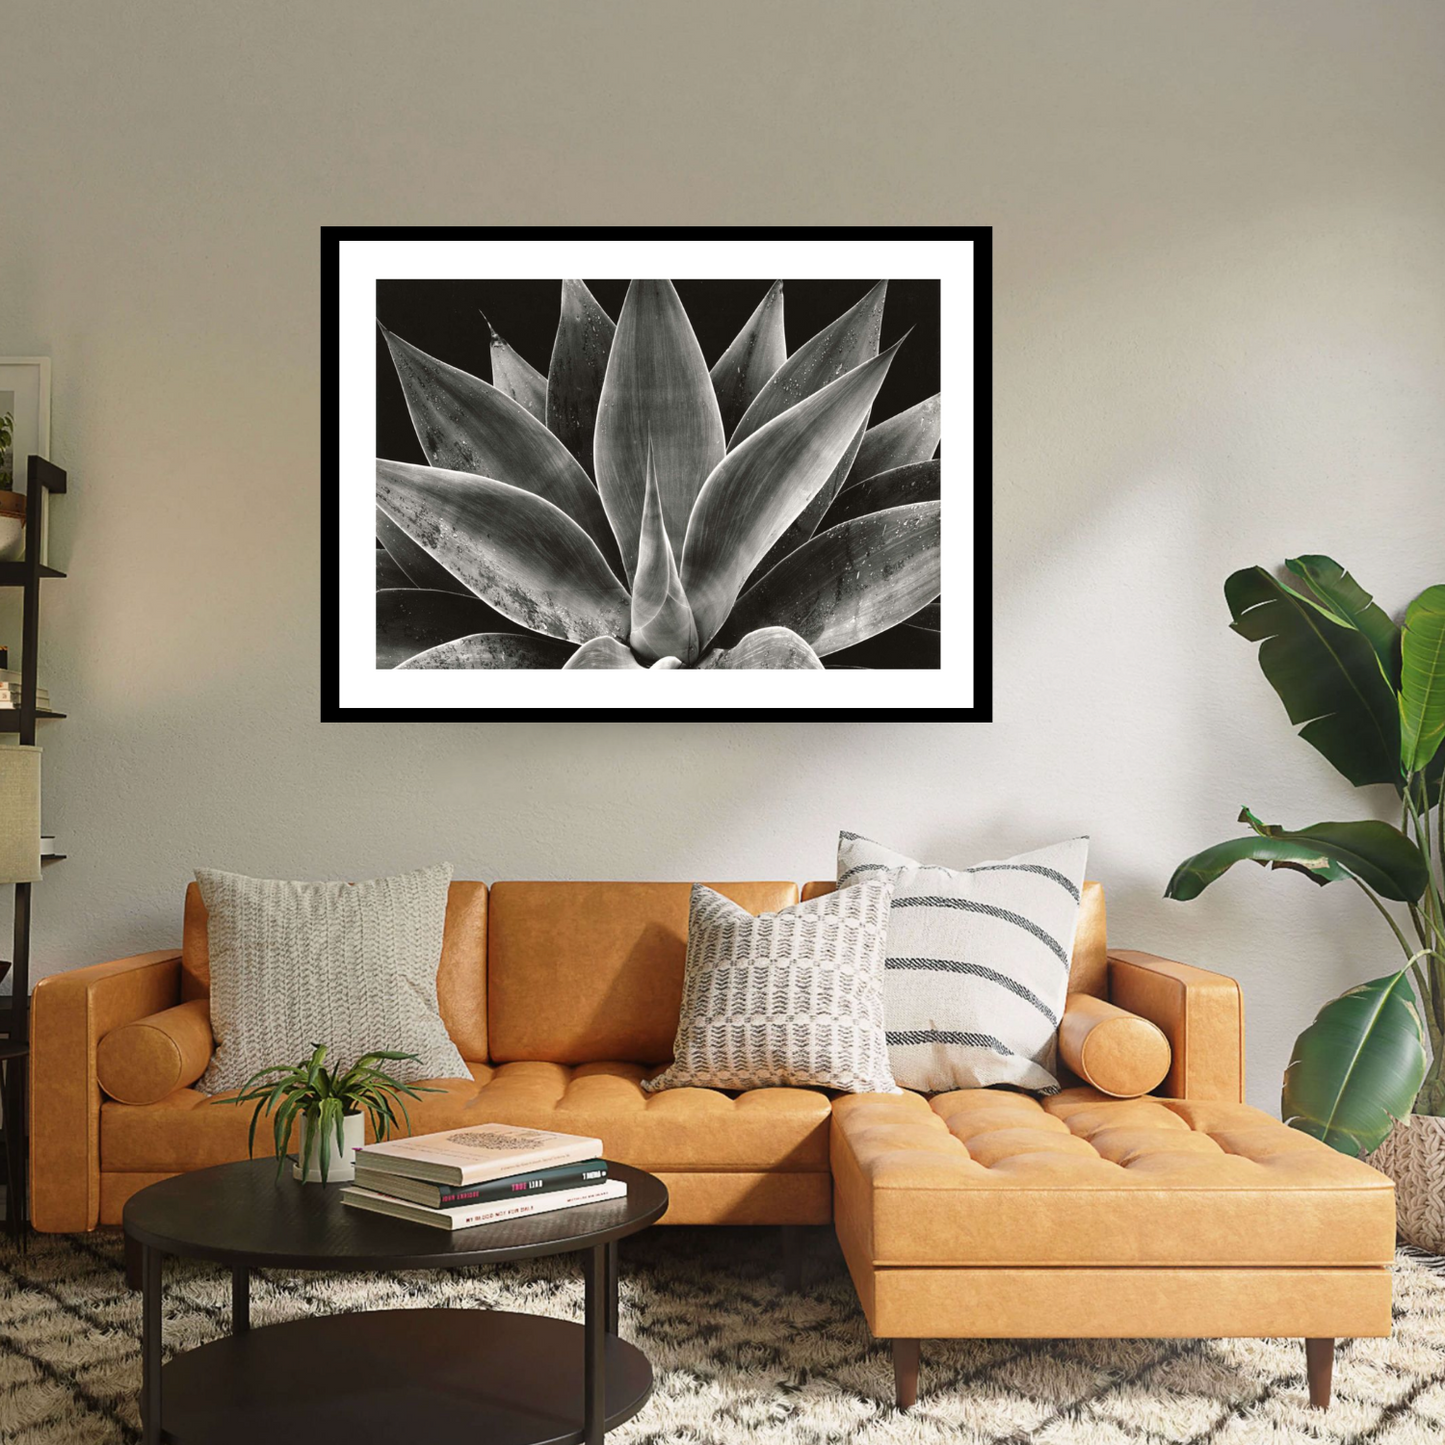 Black framed print 'Century Plant' by Brett Weston: A captivating black & white close-up of the intricate centre of an Agave Americana, showcasing the plant's stunning natural geometry and texture.